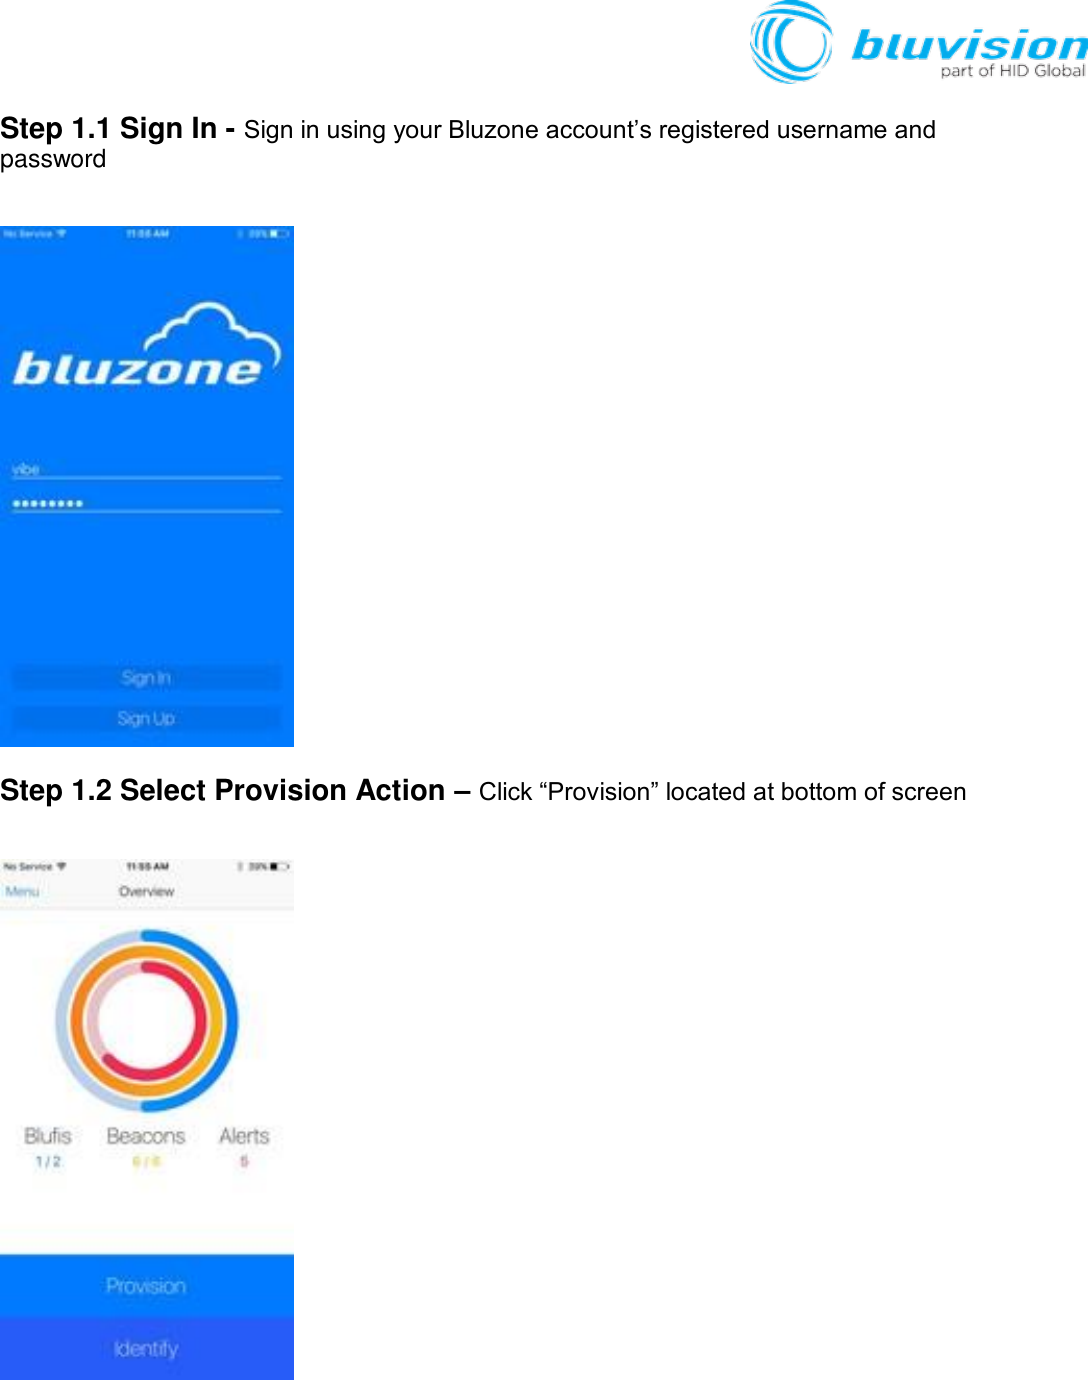   Step 1.1 Sign In - Sign in using your Bluzone account’s registered username and password    Step 1.2 Select Provision Action – Click “Provision” located at bottom of screen   